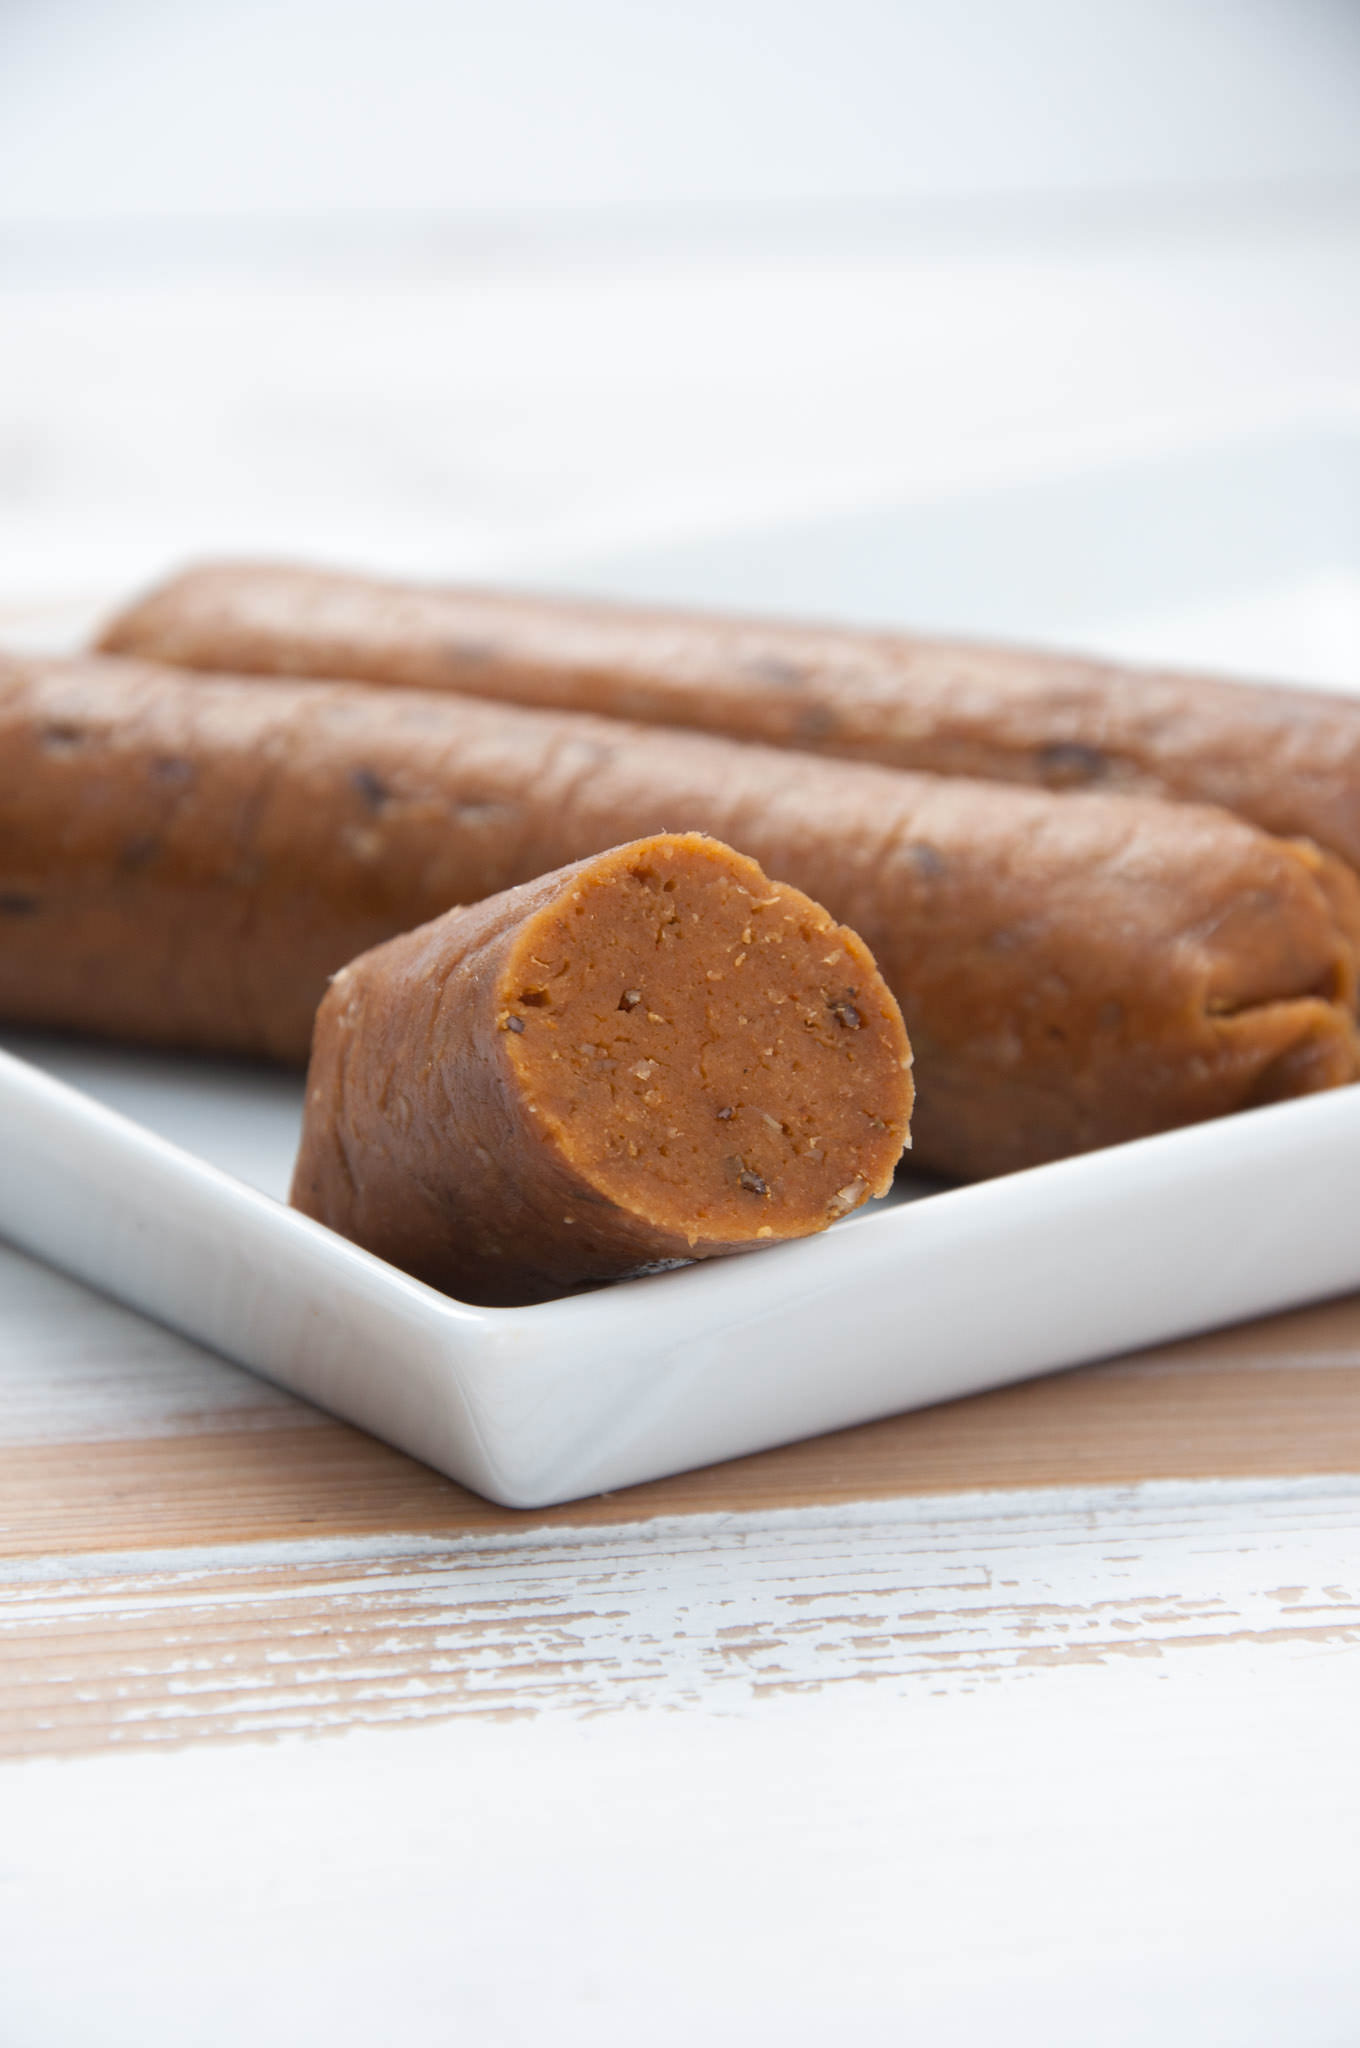 How Healthy Is Vegan Sausage, and What Brand Tastes Best?